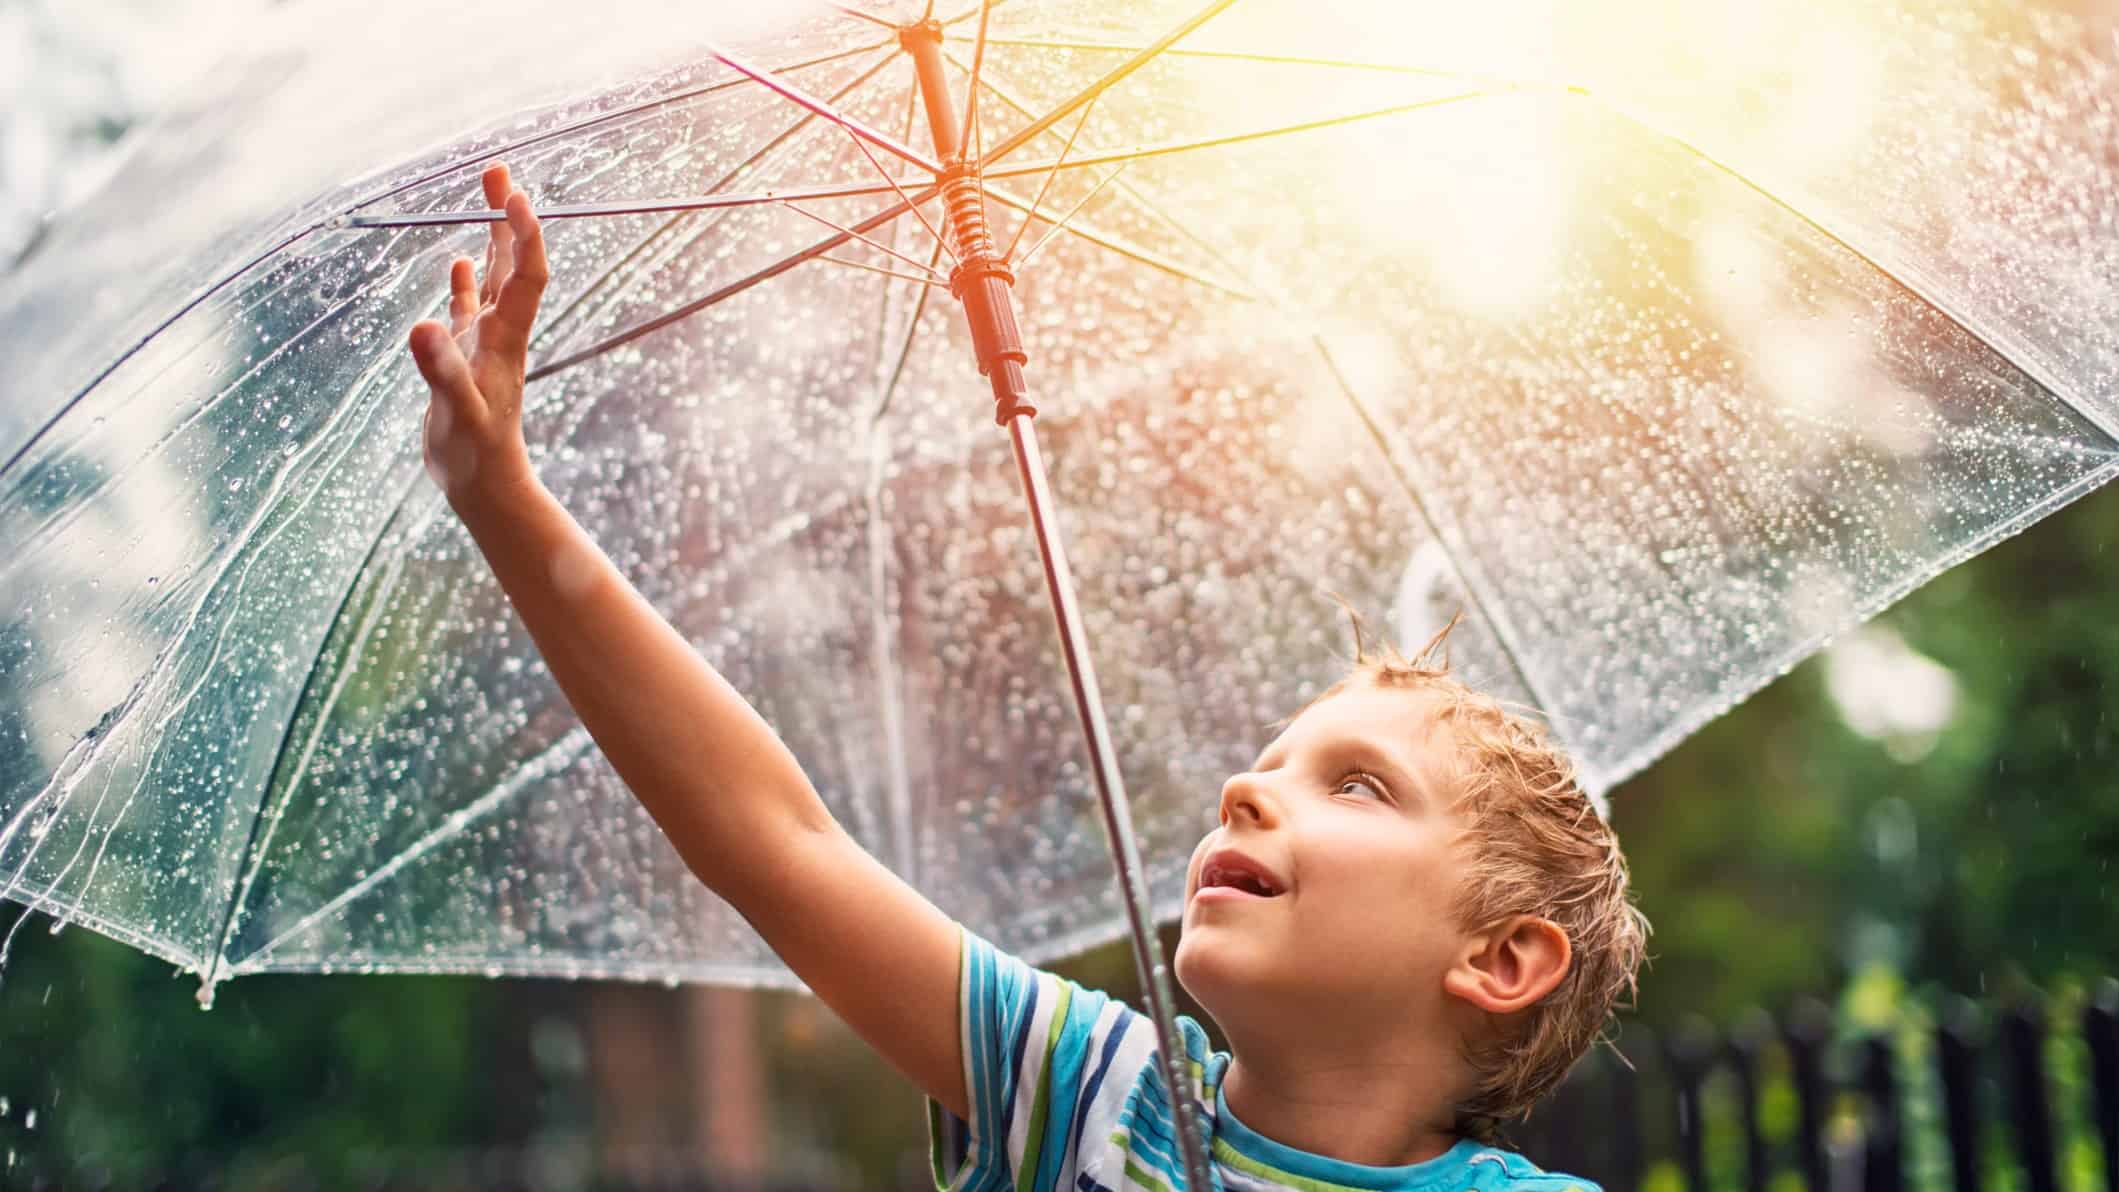 A young boy reaches up to touch the raindrops on his umbrella, as the sun comes out in the sky behind him representing the rising Fortescue share price due to heavy rain in Brazil recently